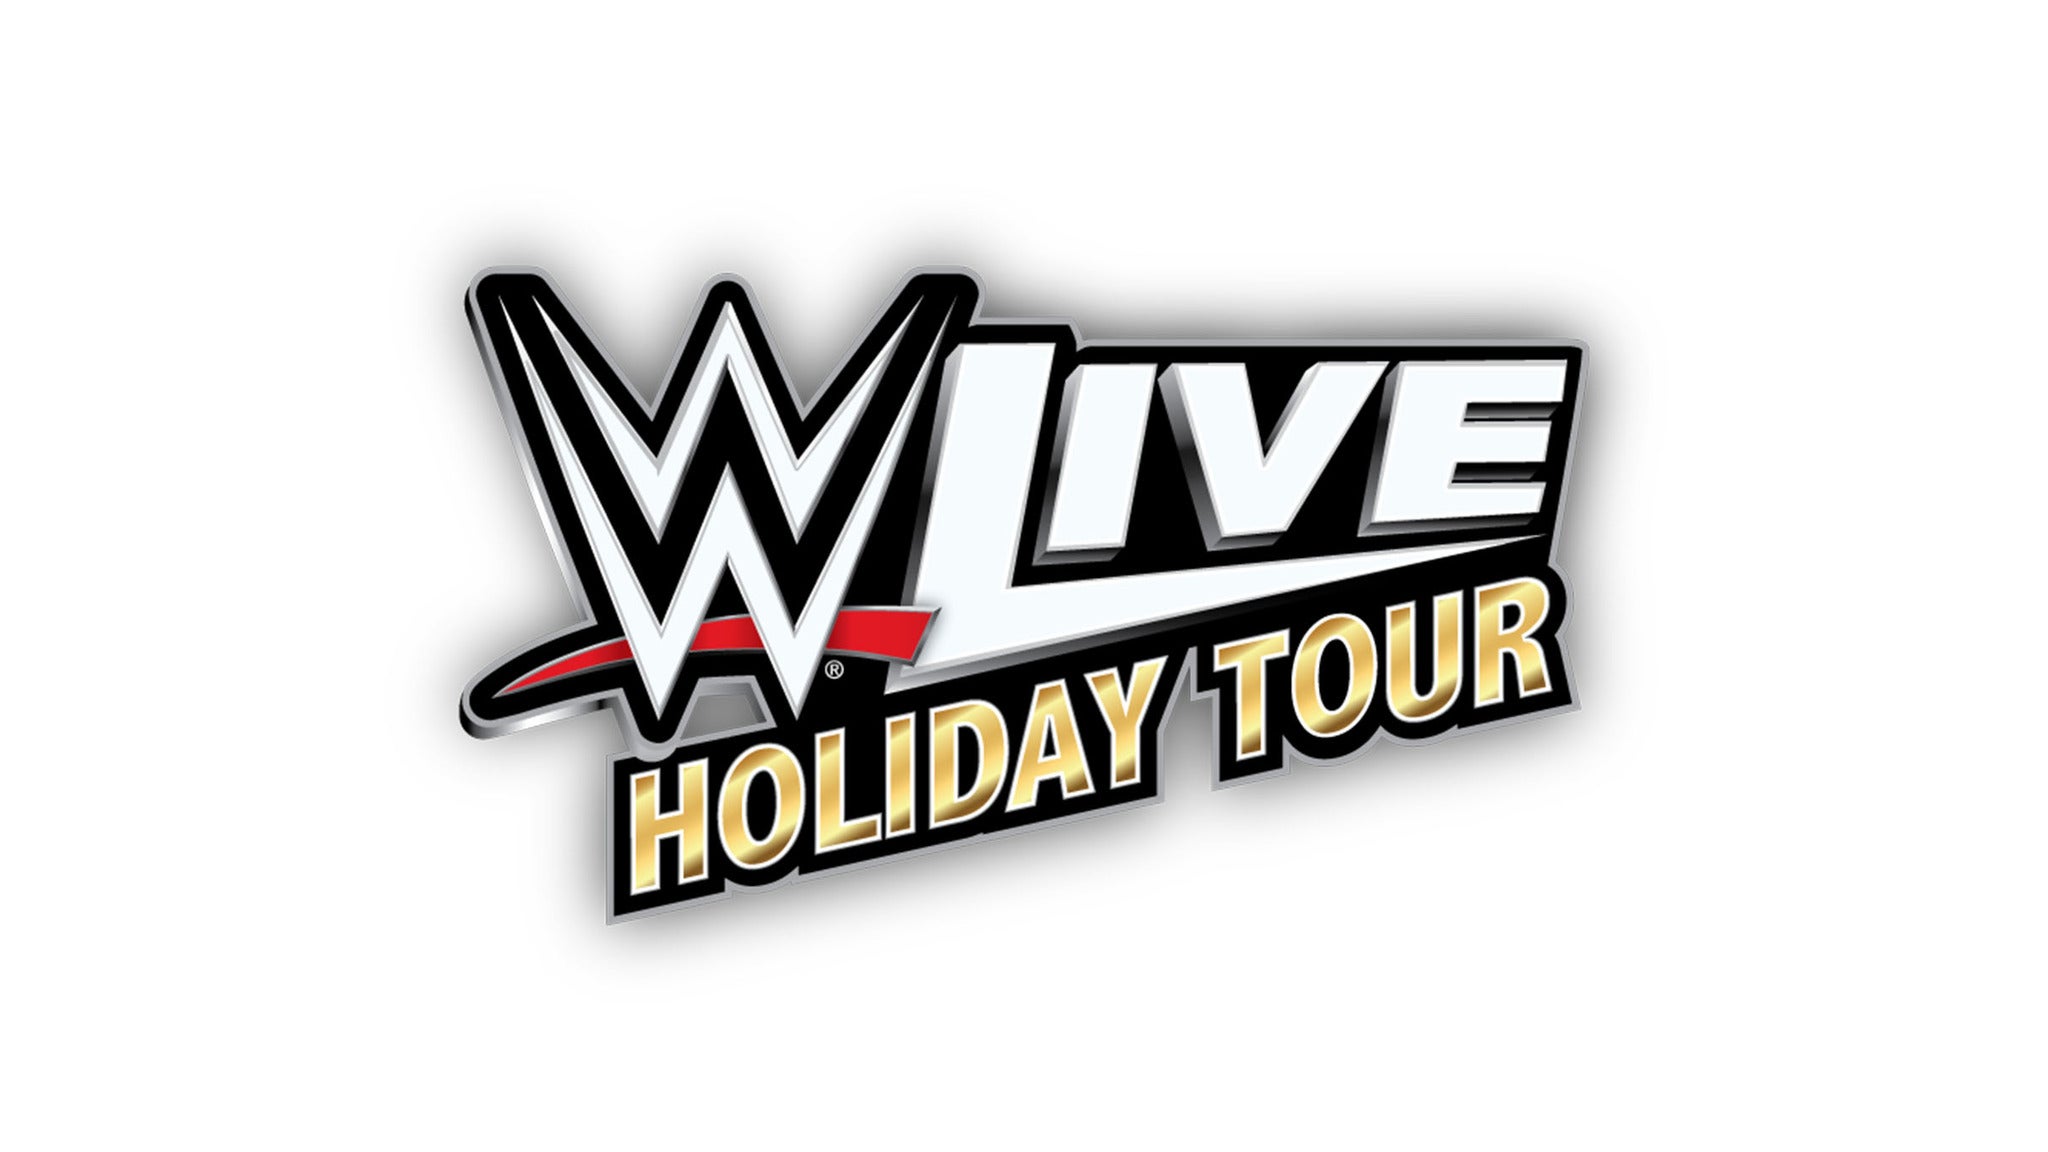 WWE Live Holiday Tour in Tampa promo photo for VIP Package presale offer code